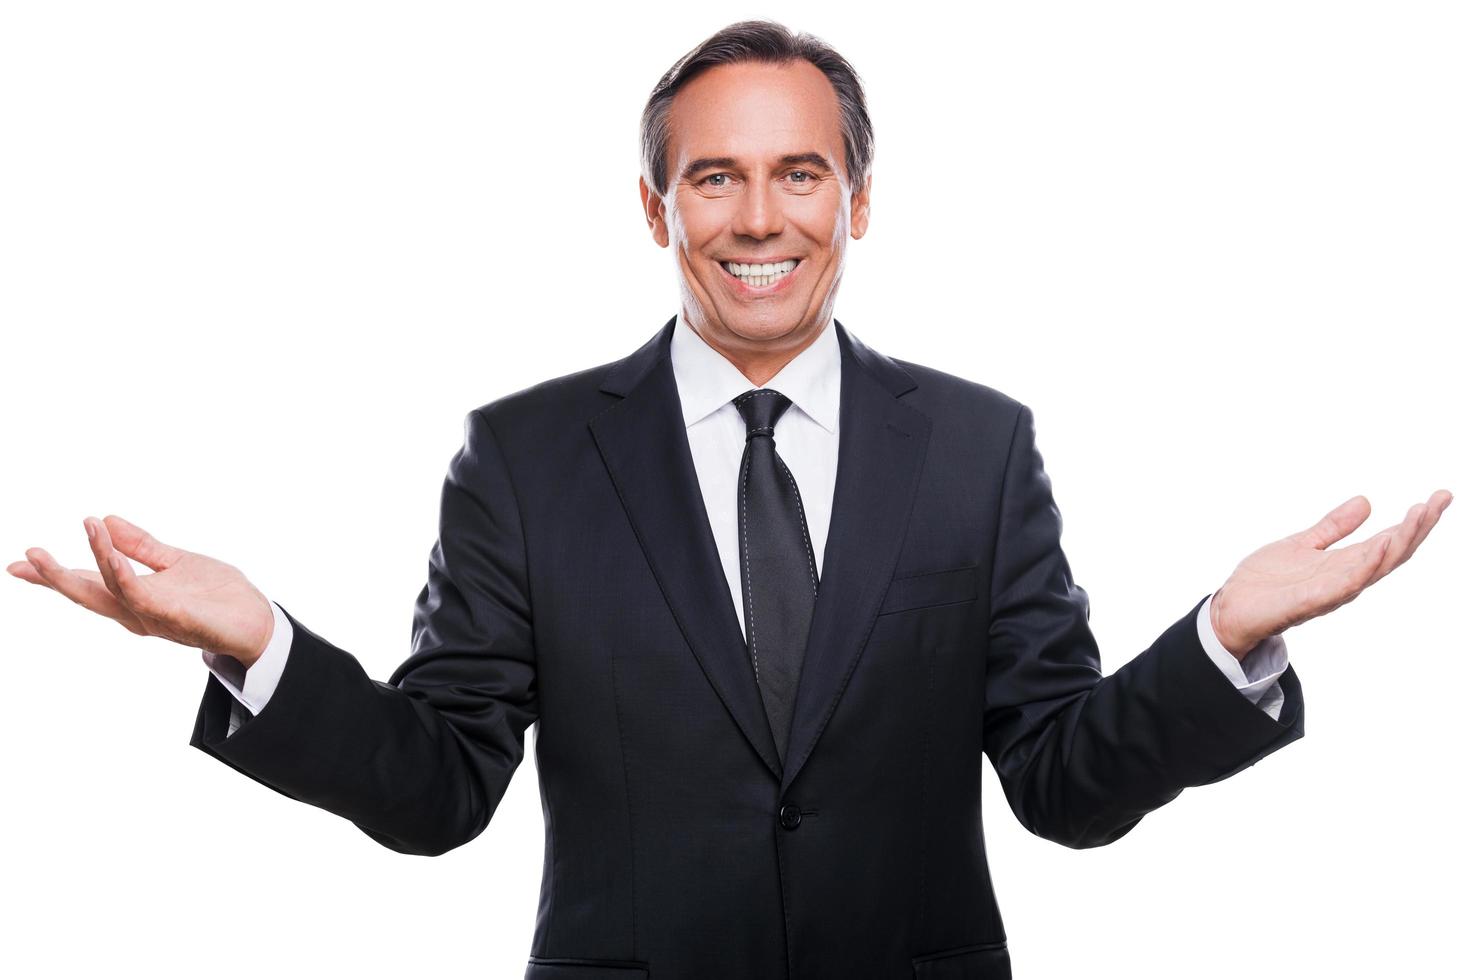 Confident business expert. Happy young man in shirt and tie gesturing and smiling while standing isolated on white background photo